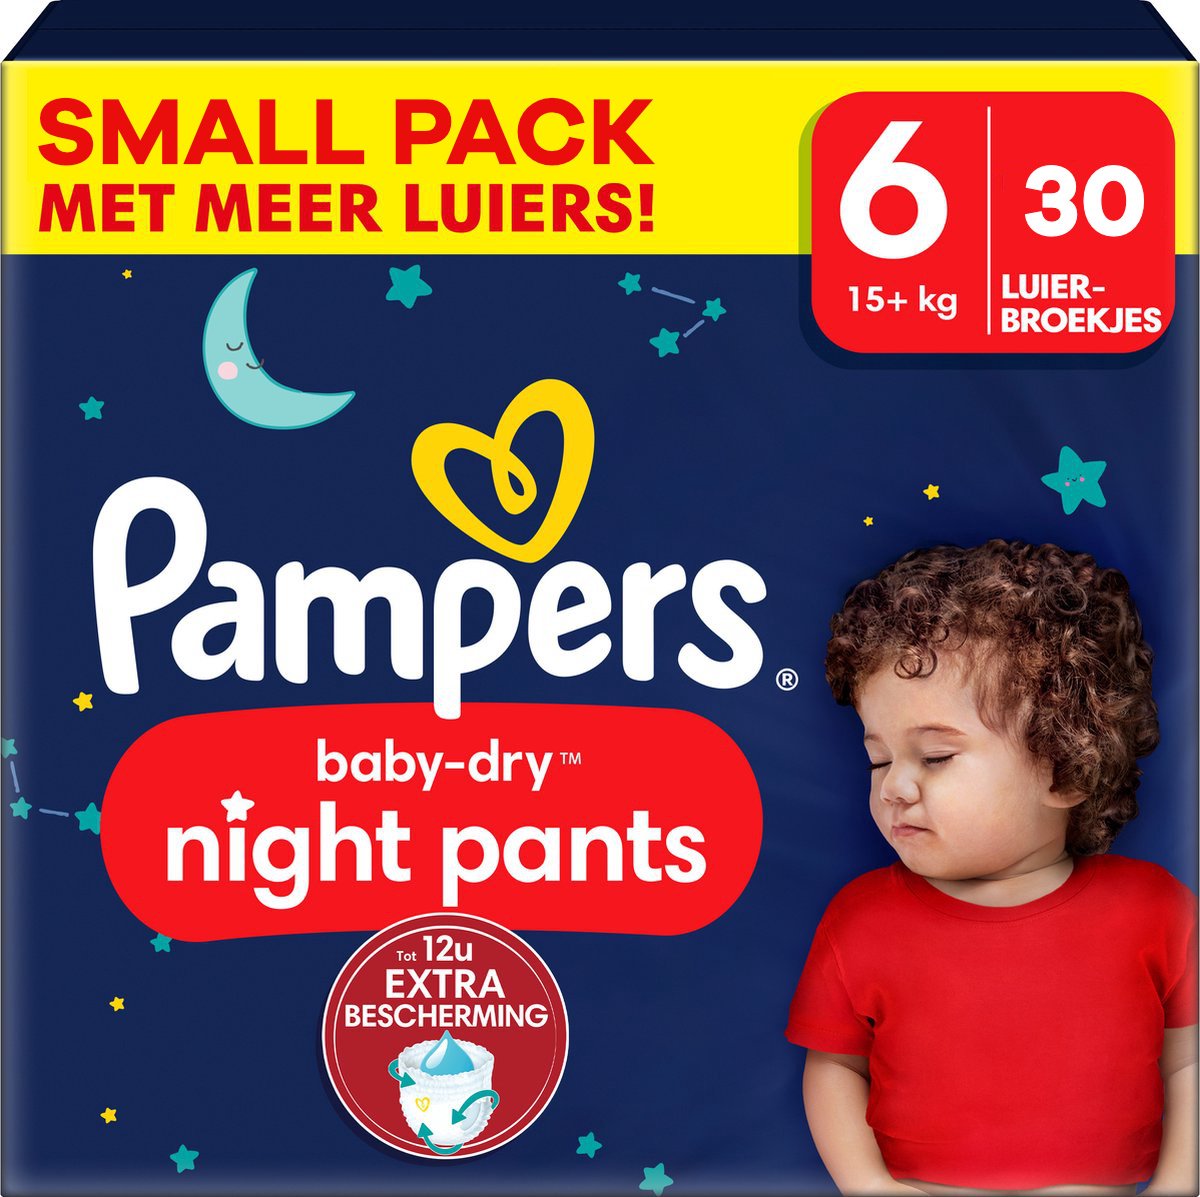 PAMPERS Baby-dry Couches-culottes nappy pants taille 6 (+ de 15kg) 66  couches pas cher 